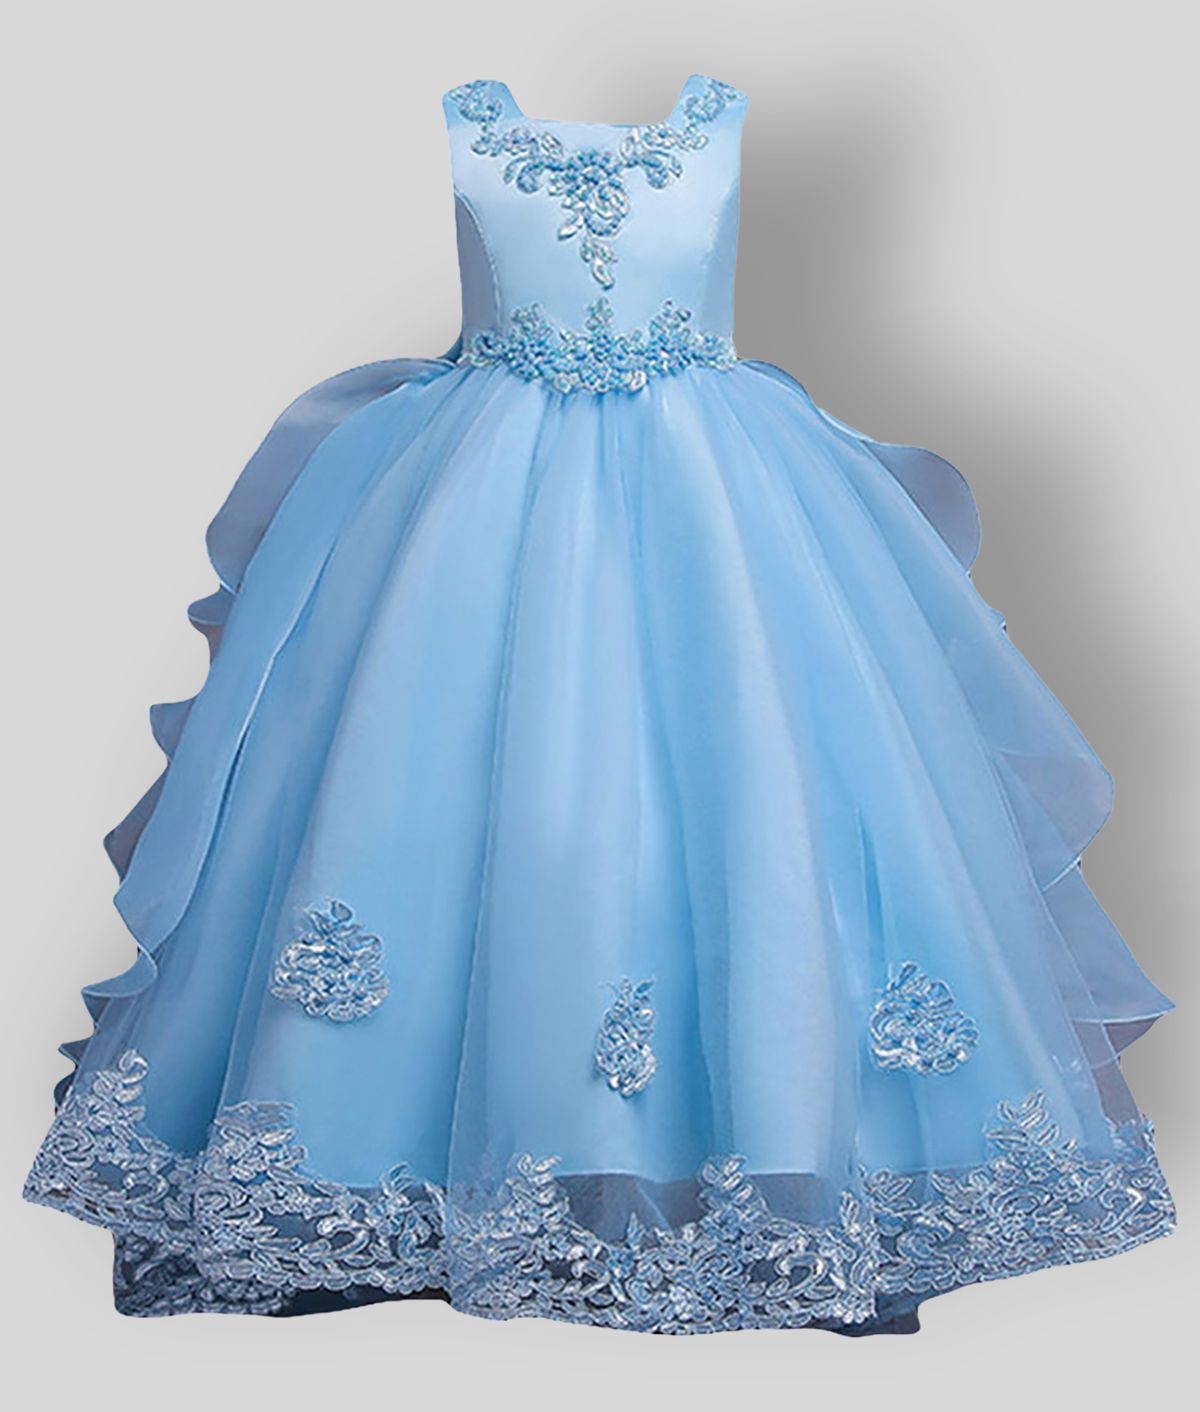 HOPSCOTCH - Aqua Polyester Girl's Gown ...